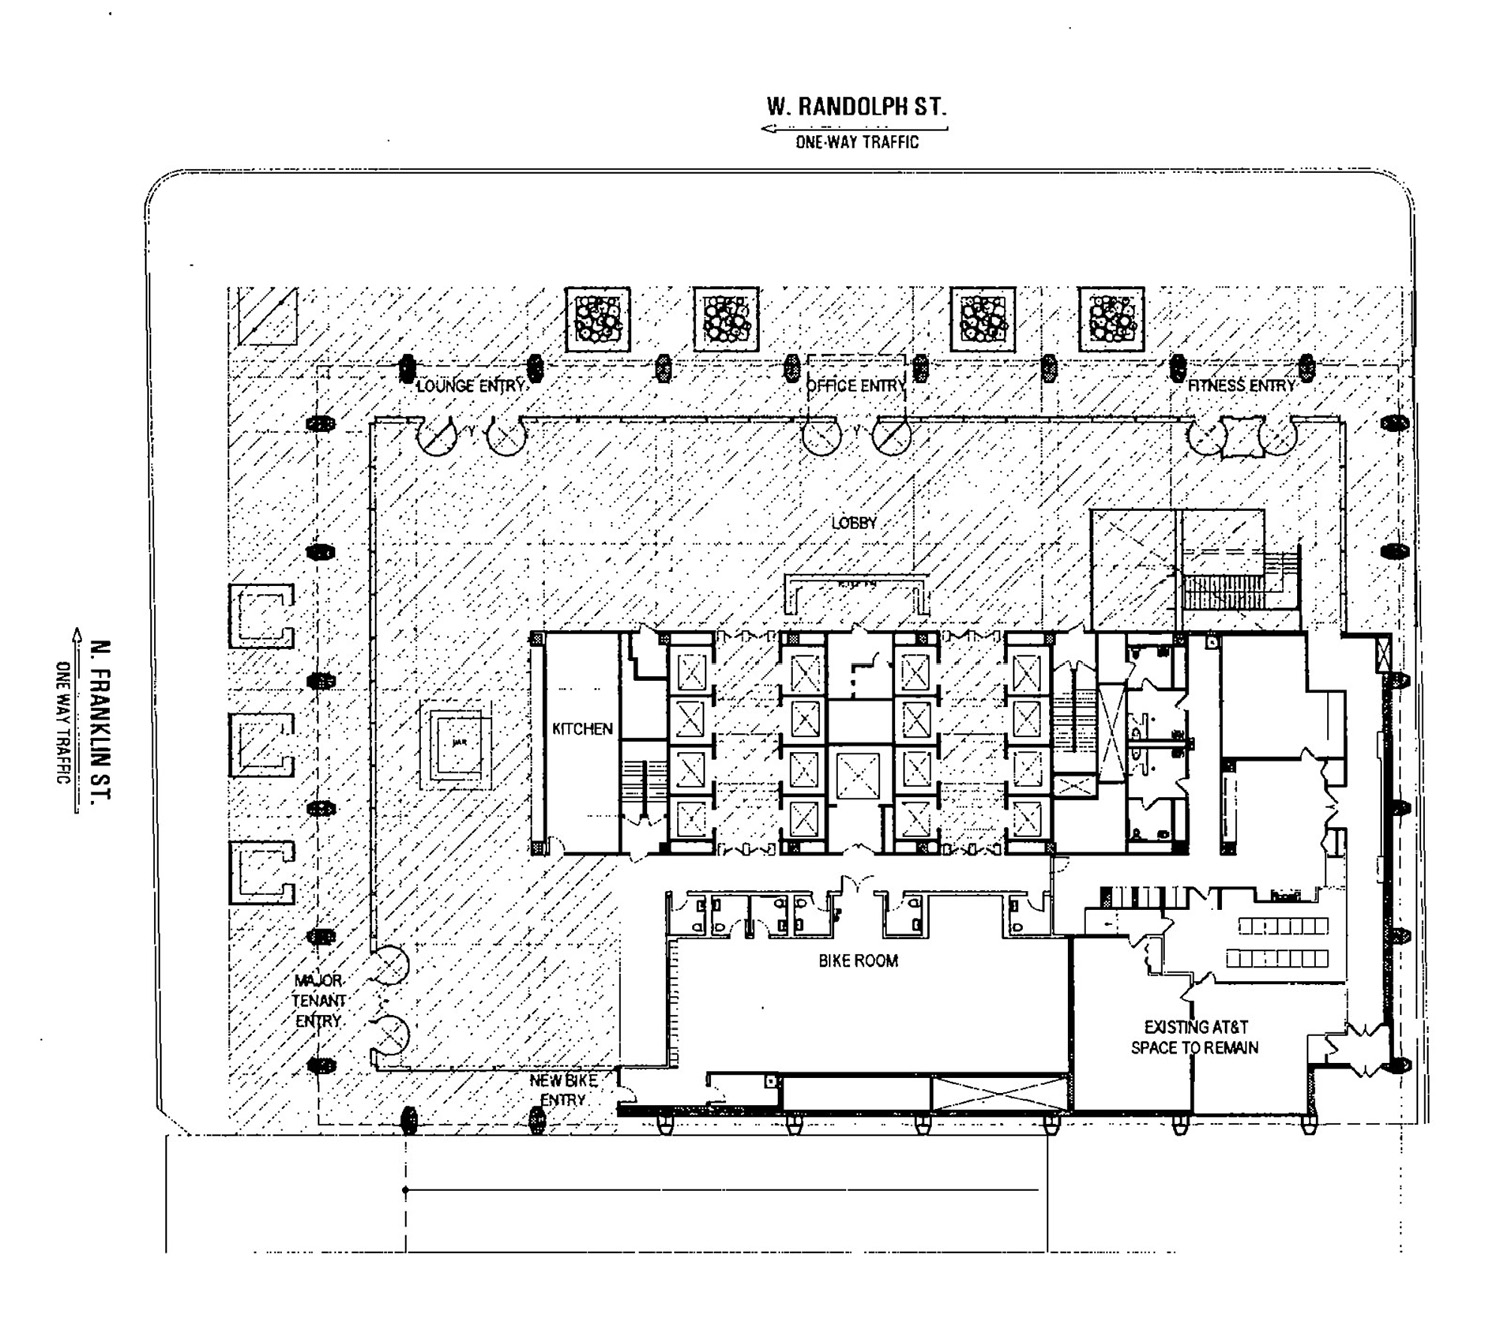 Ground Floor Plan for Illinois Bell Building. Image by CCL